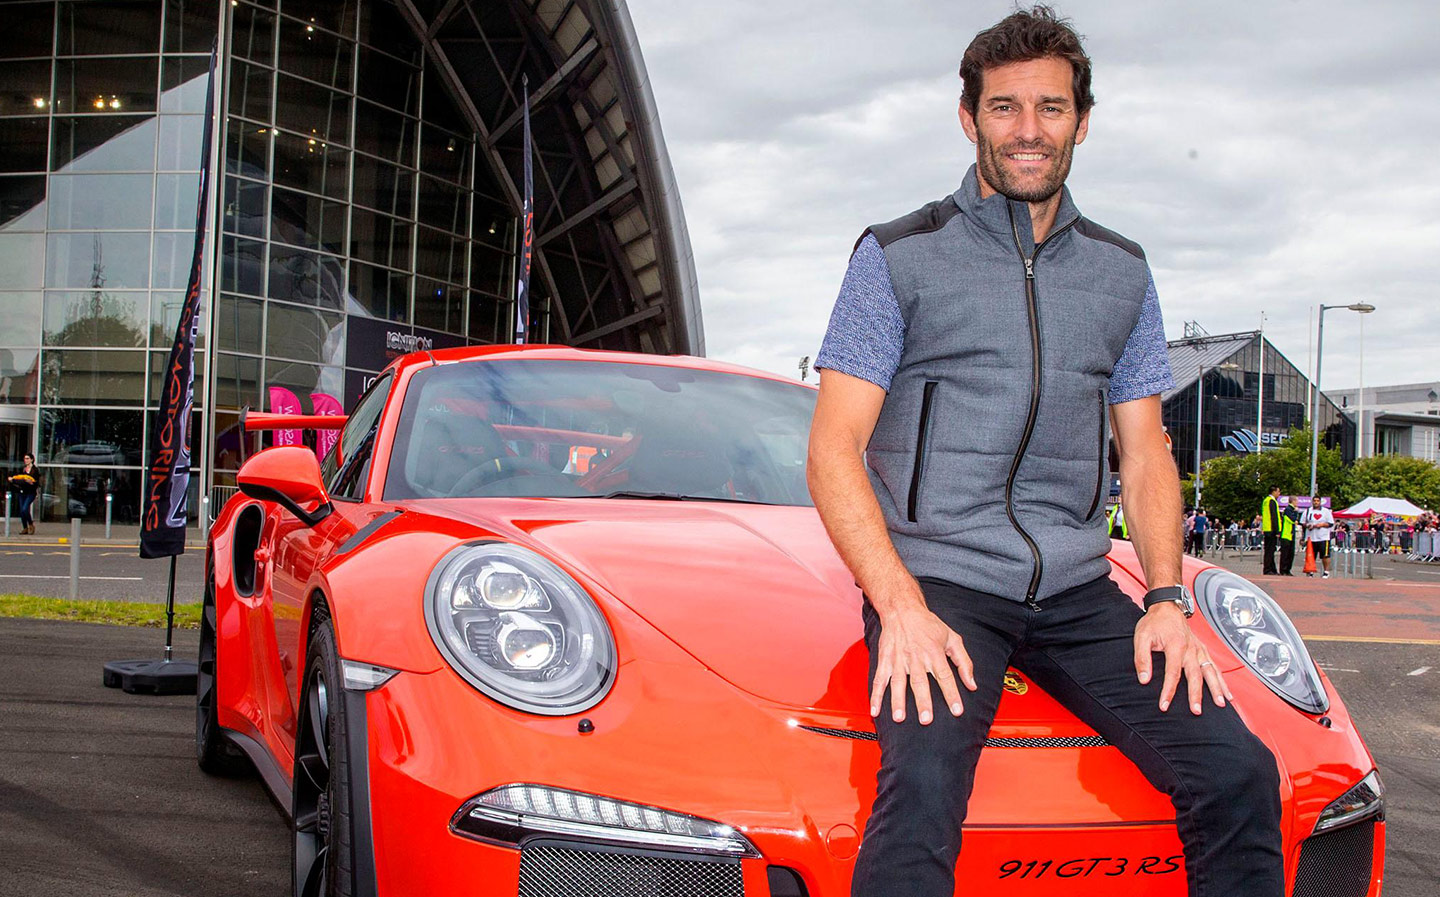 Me and My Motor: Mark Webber, former F1 and sports car racer